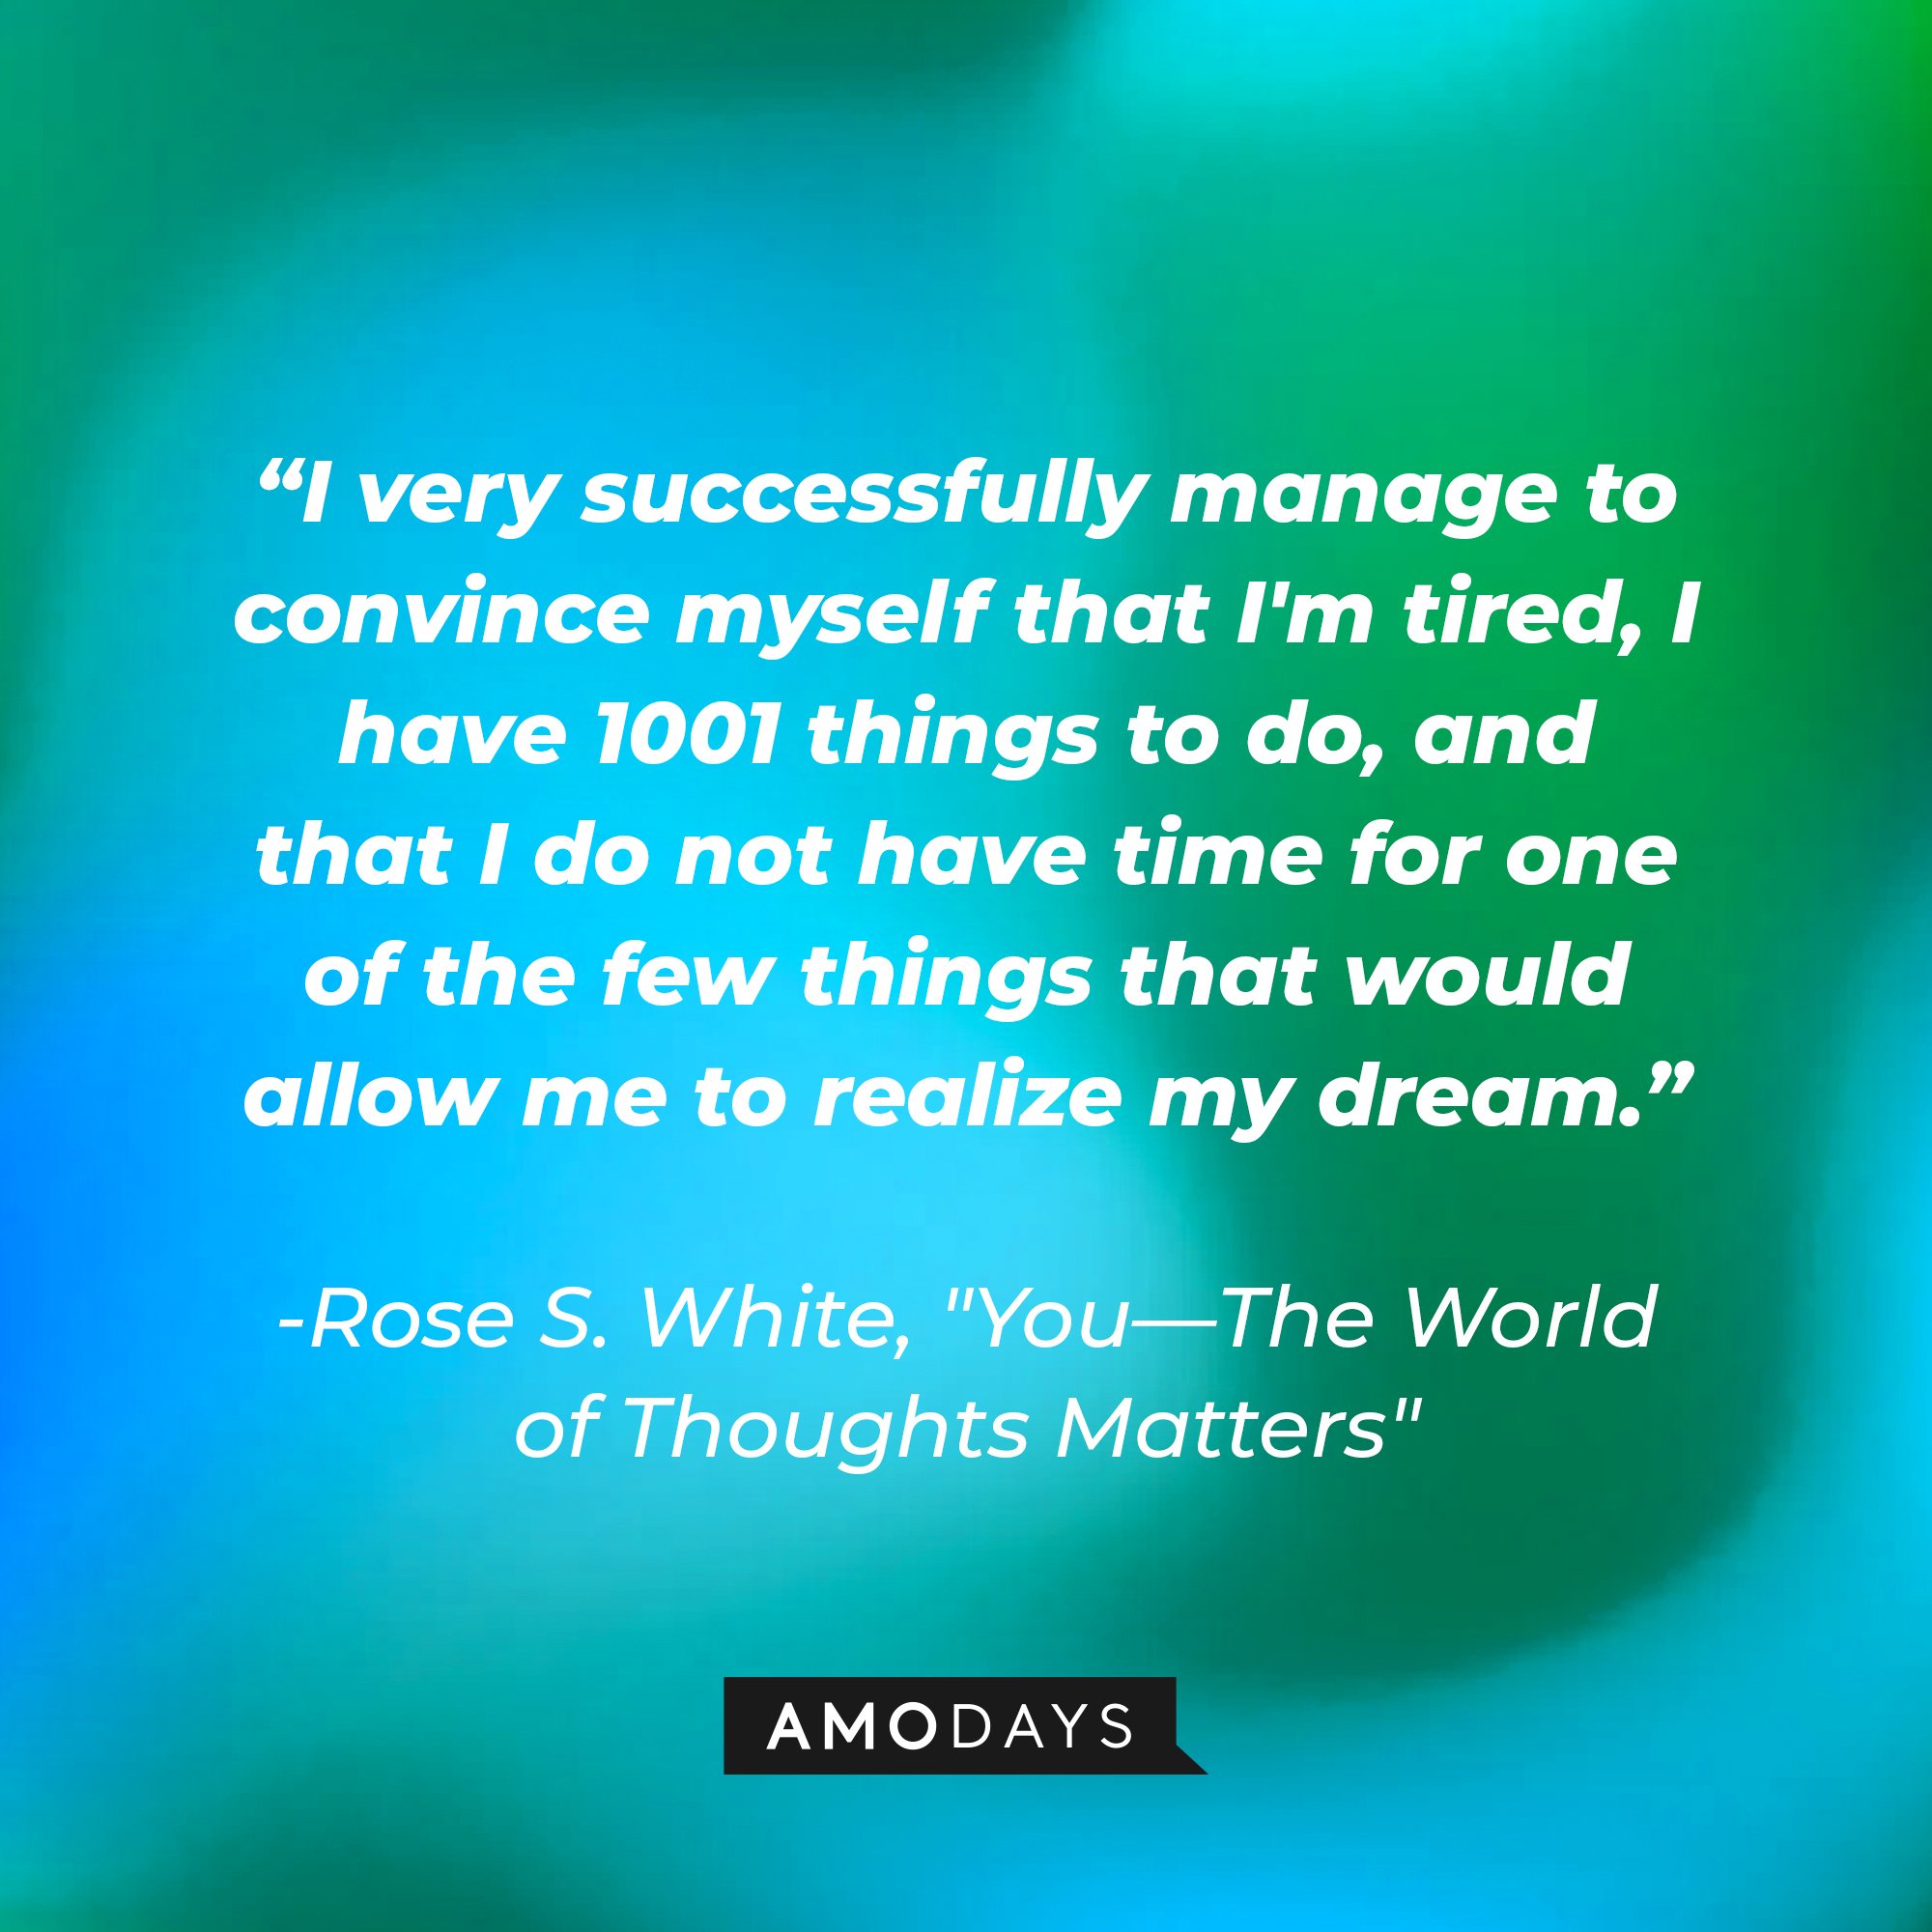 Rose S. White’s quote from, "You—The World of Thoughts Matters": I very successfully manage to convince myself that I'm tired, I have 1001 things to do, and that I do not have time for one of the few things that would allow me to realize my dream." | Image: AmoDays